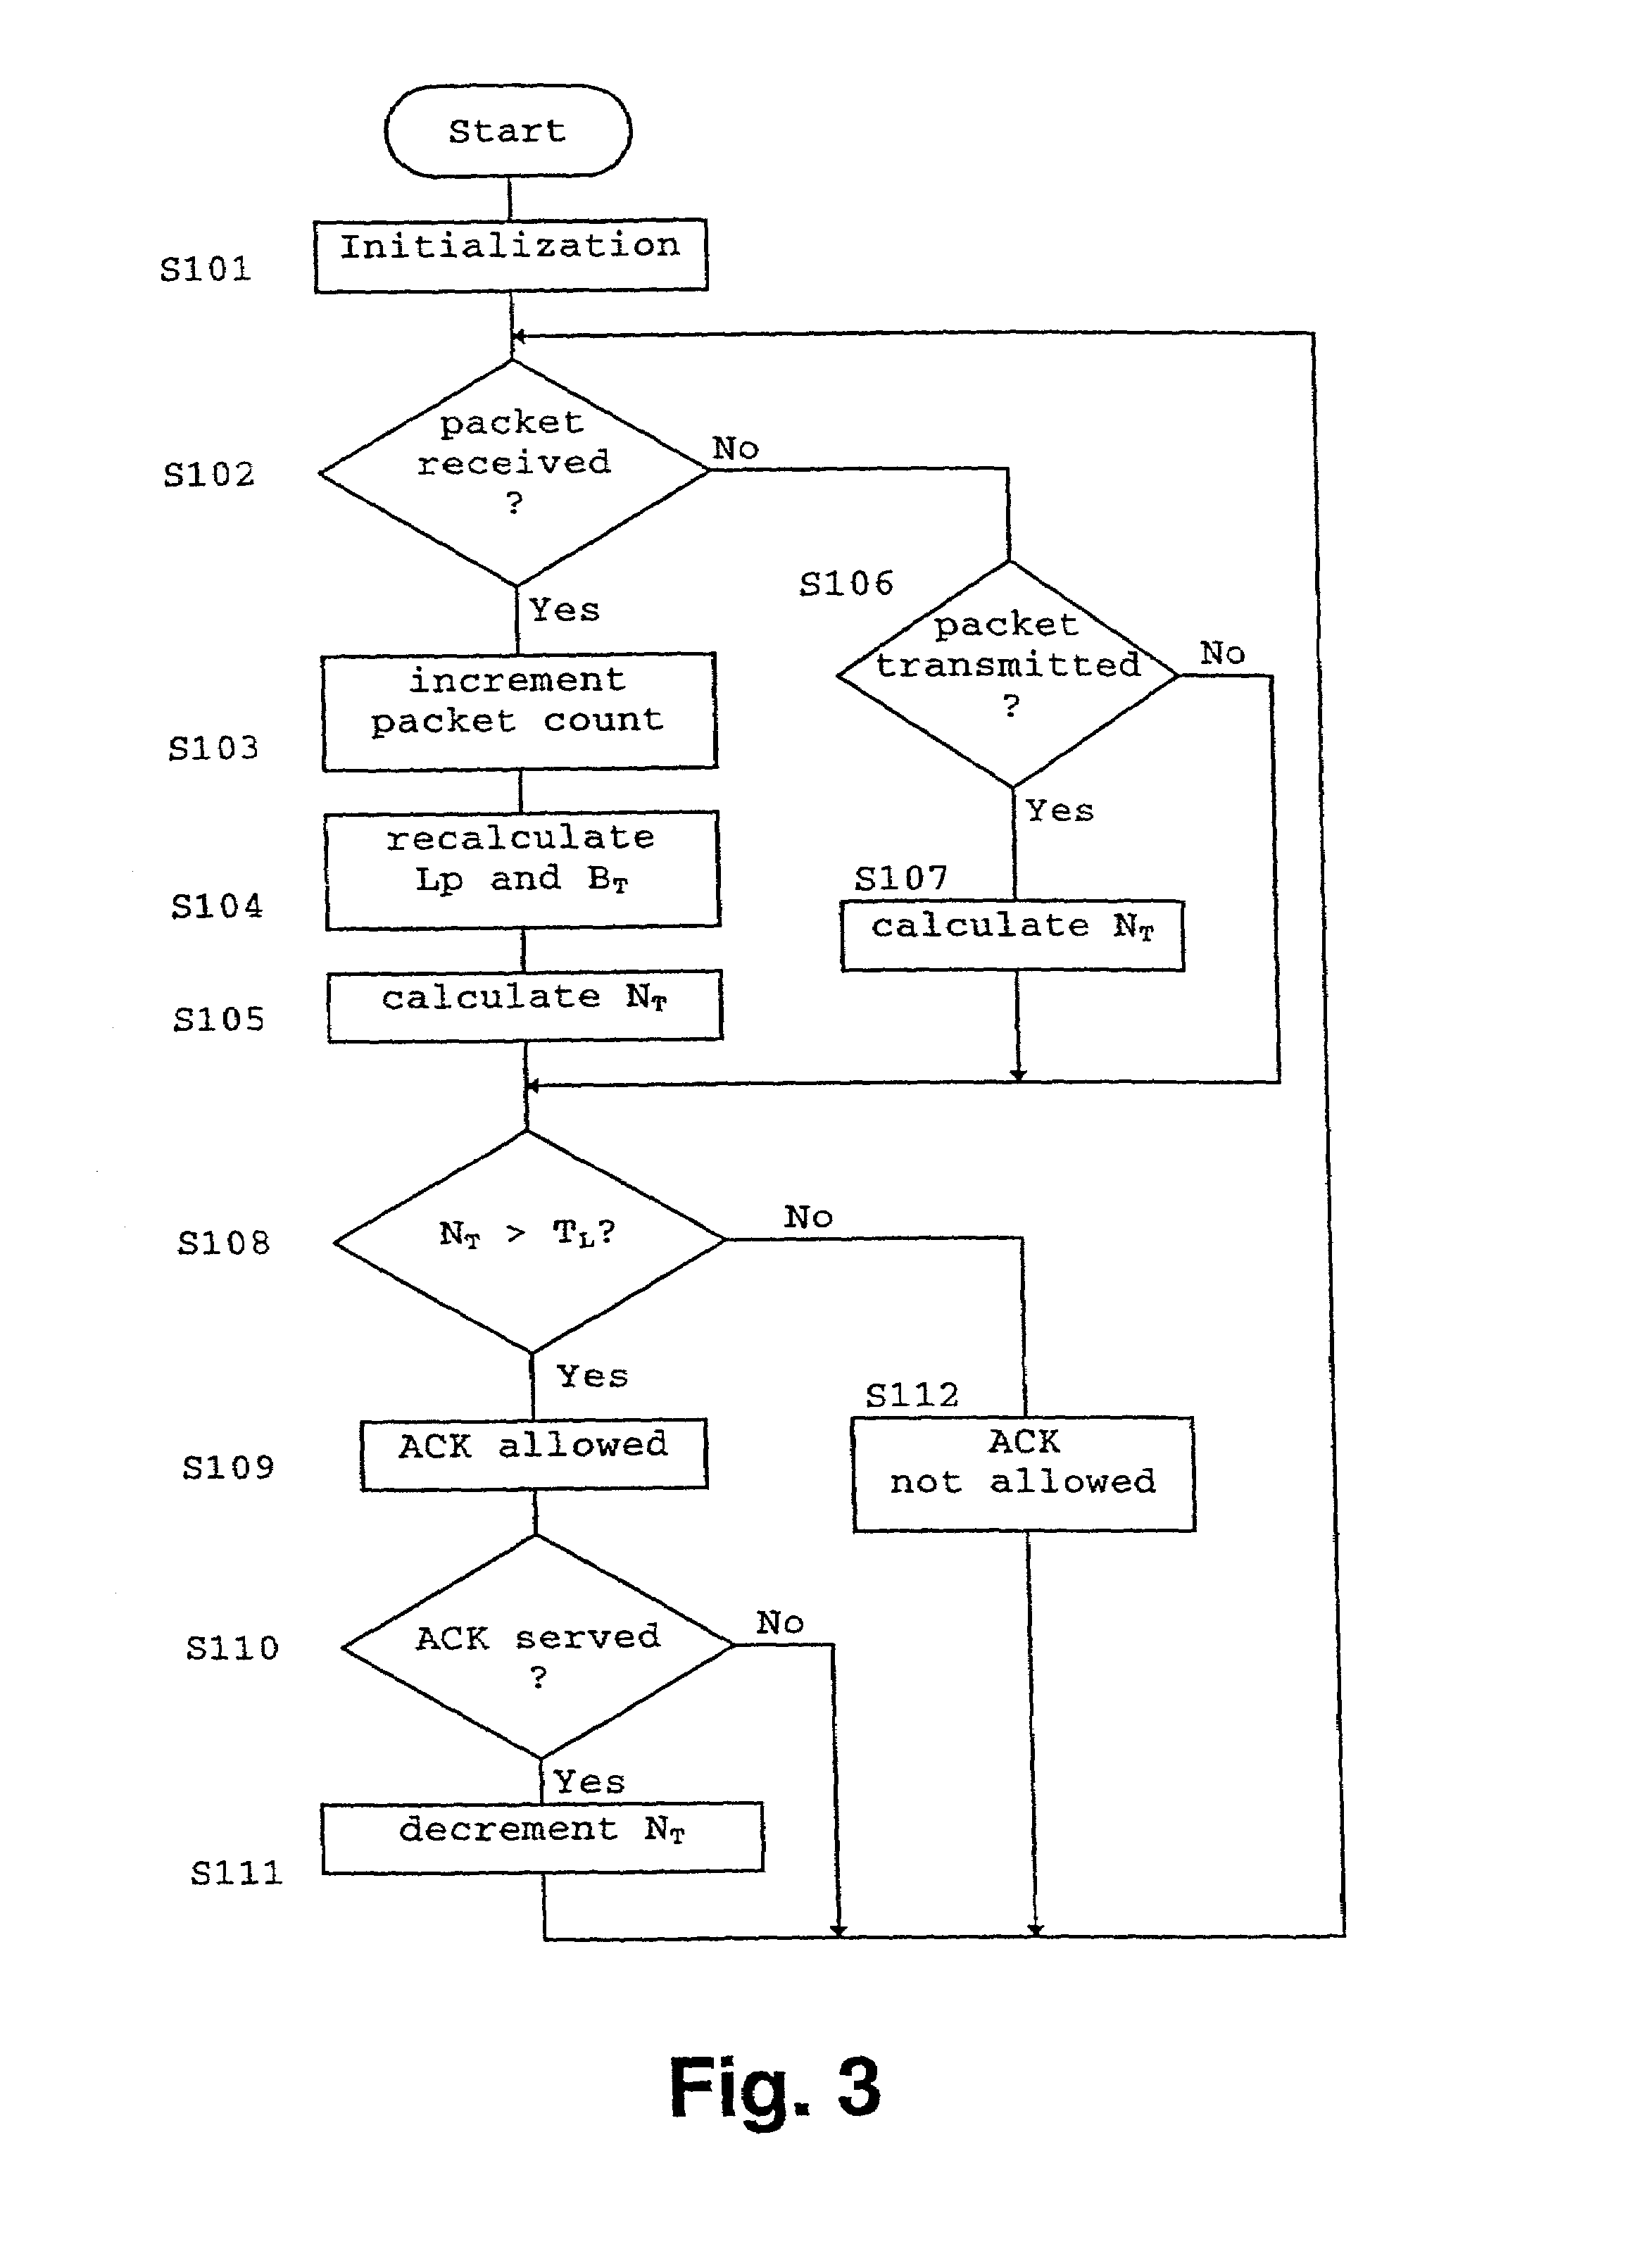 Overload control method for a packet-switched network